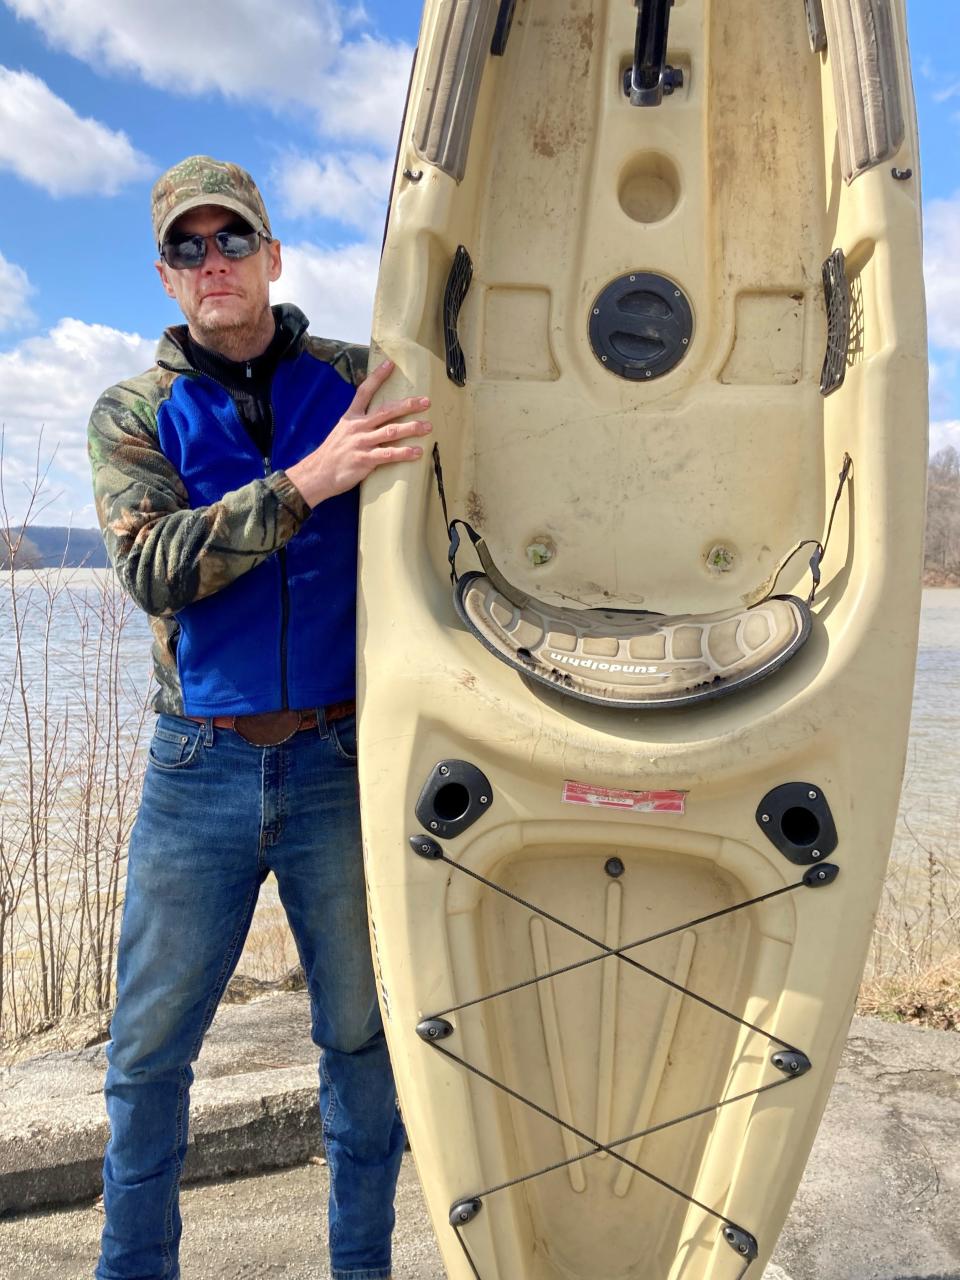 West Muskingum High School alum James Clark stands with a kayak at Dillon State Park. He is the creator of the nonprofit organization Kombat to Kayaks that will provide veterans with outdoor activities, such as kayaking, fishing and hiking